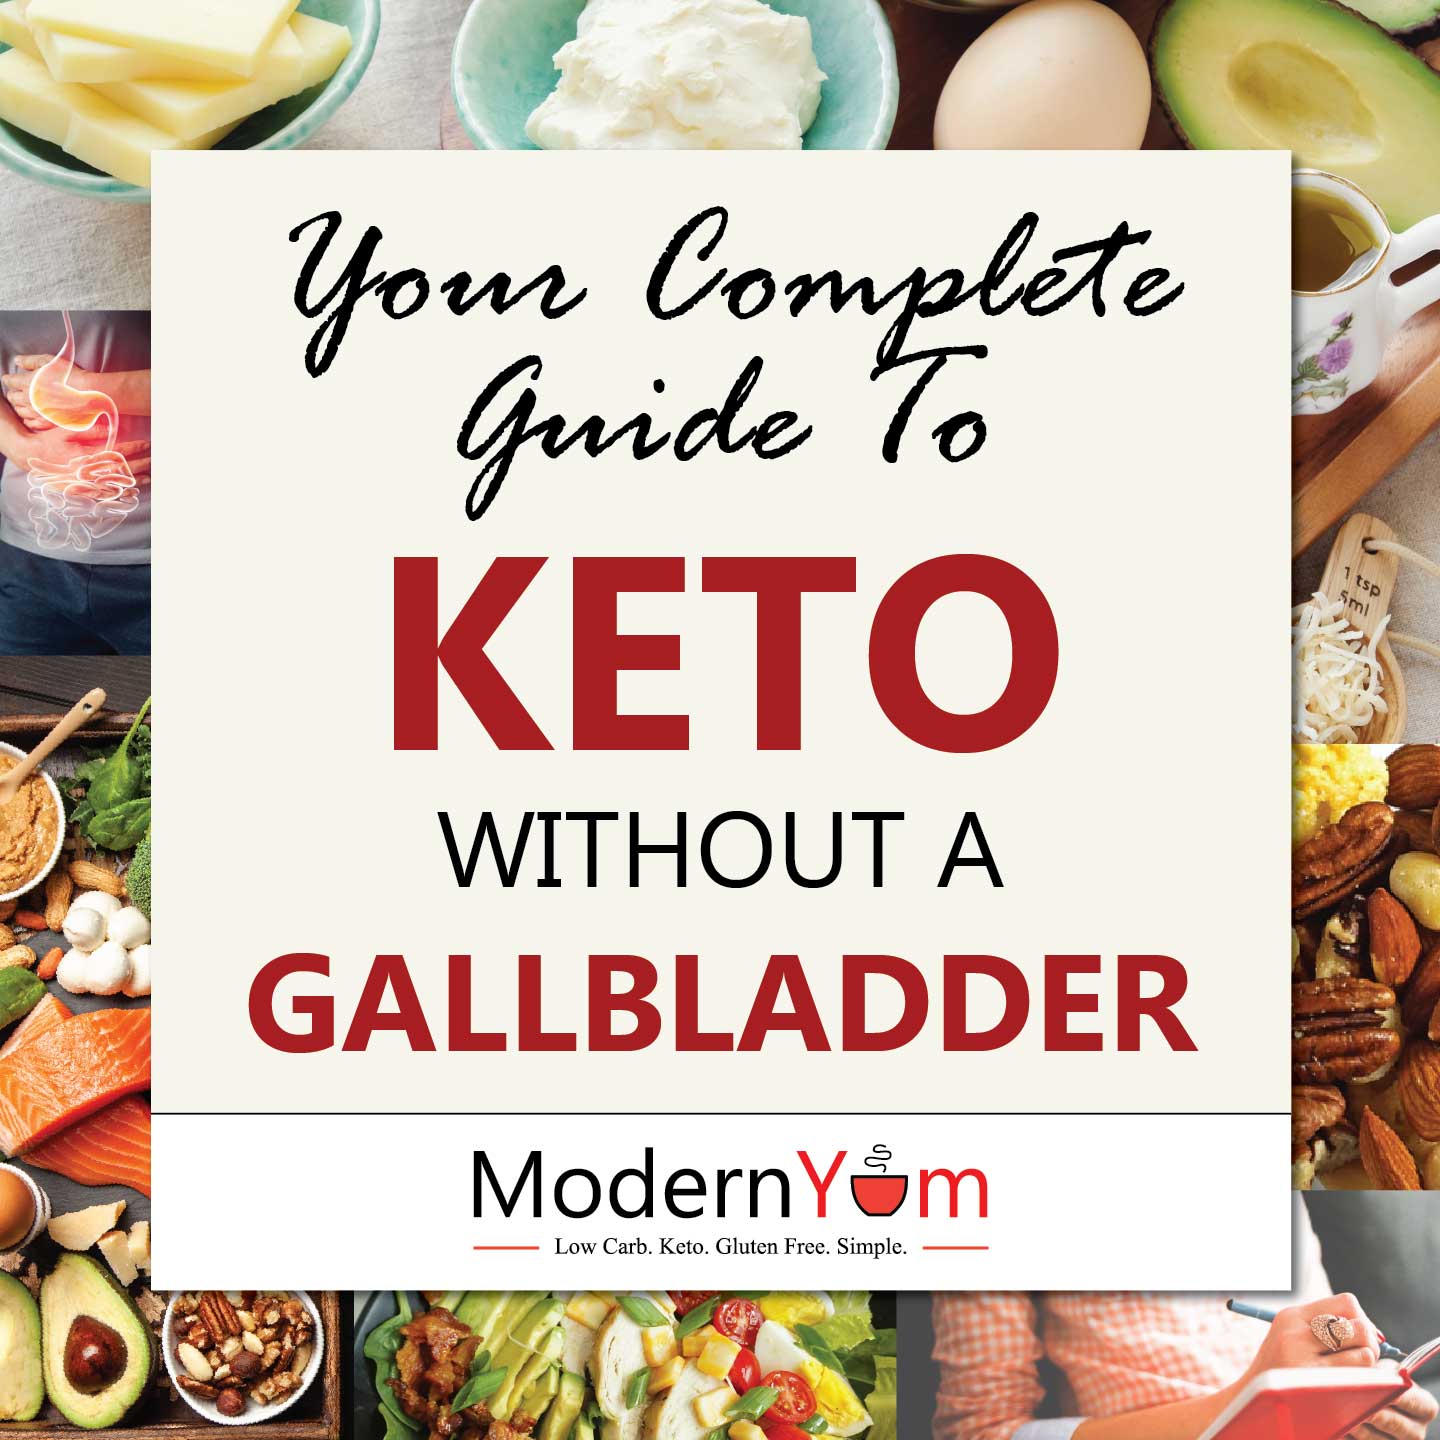 Show moms and women following a ketogenic diet some love with